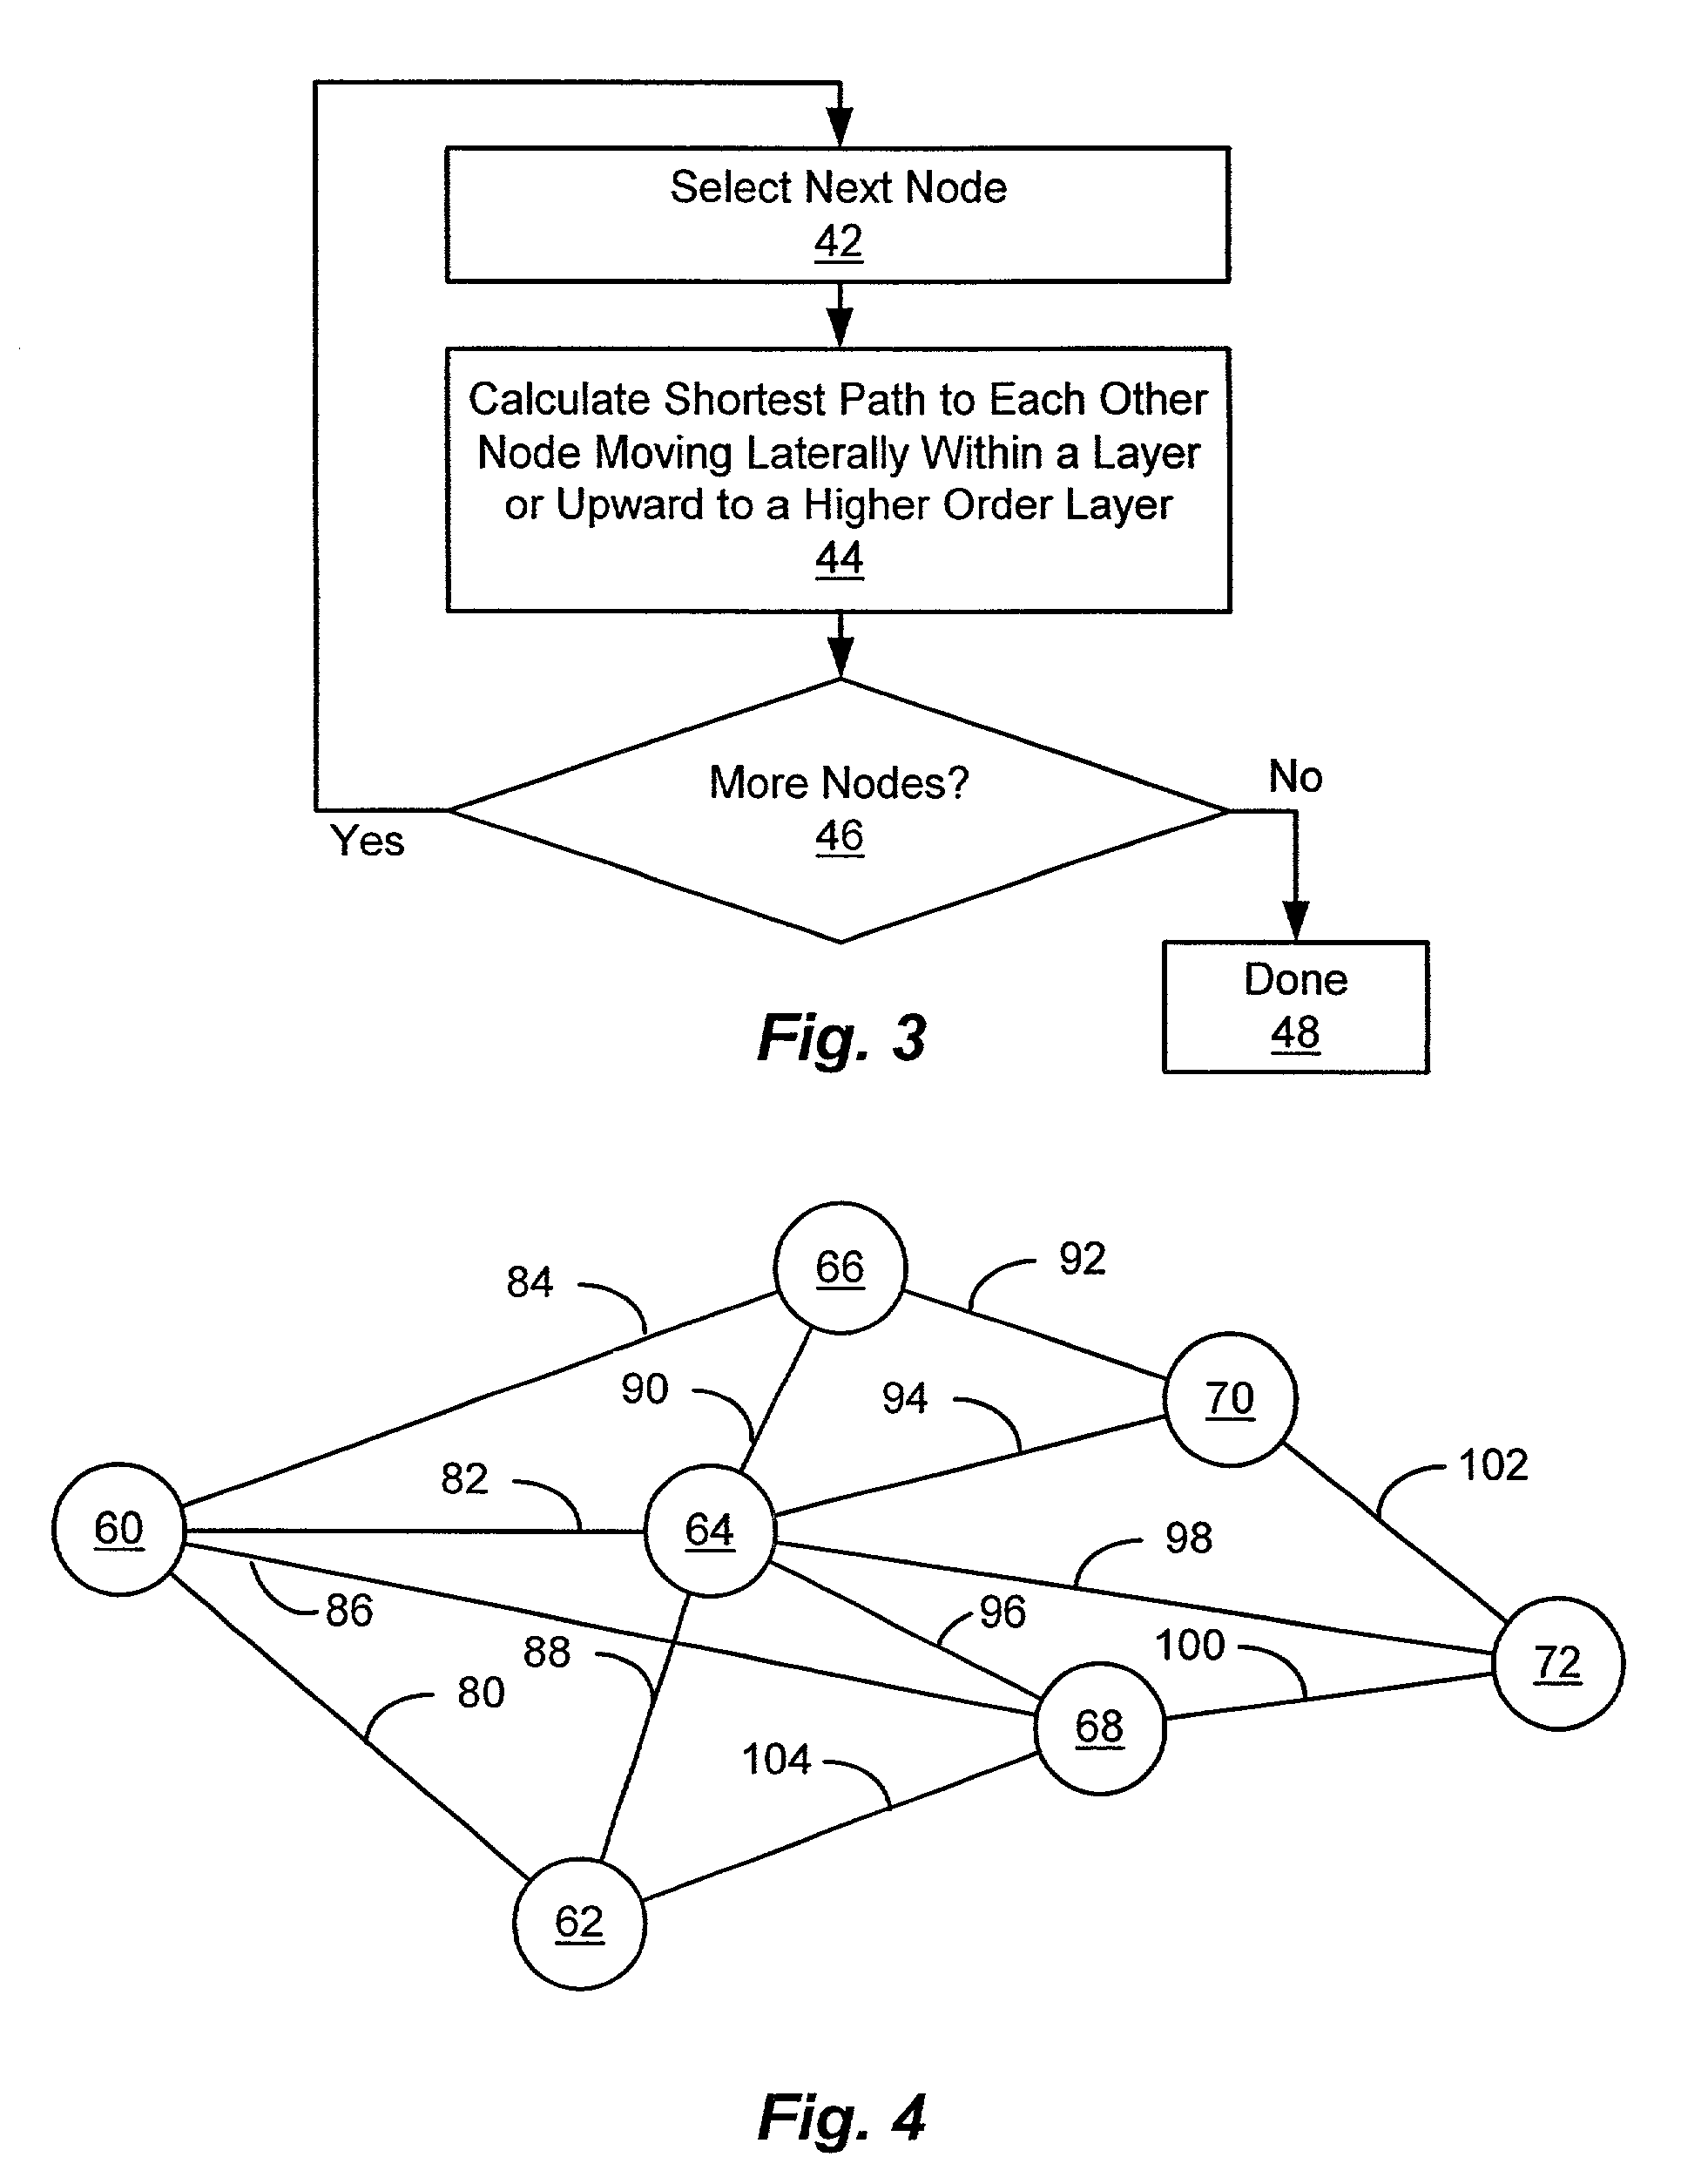 System and method for deadlock-free routing on arbitrary network topologies